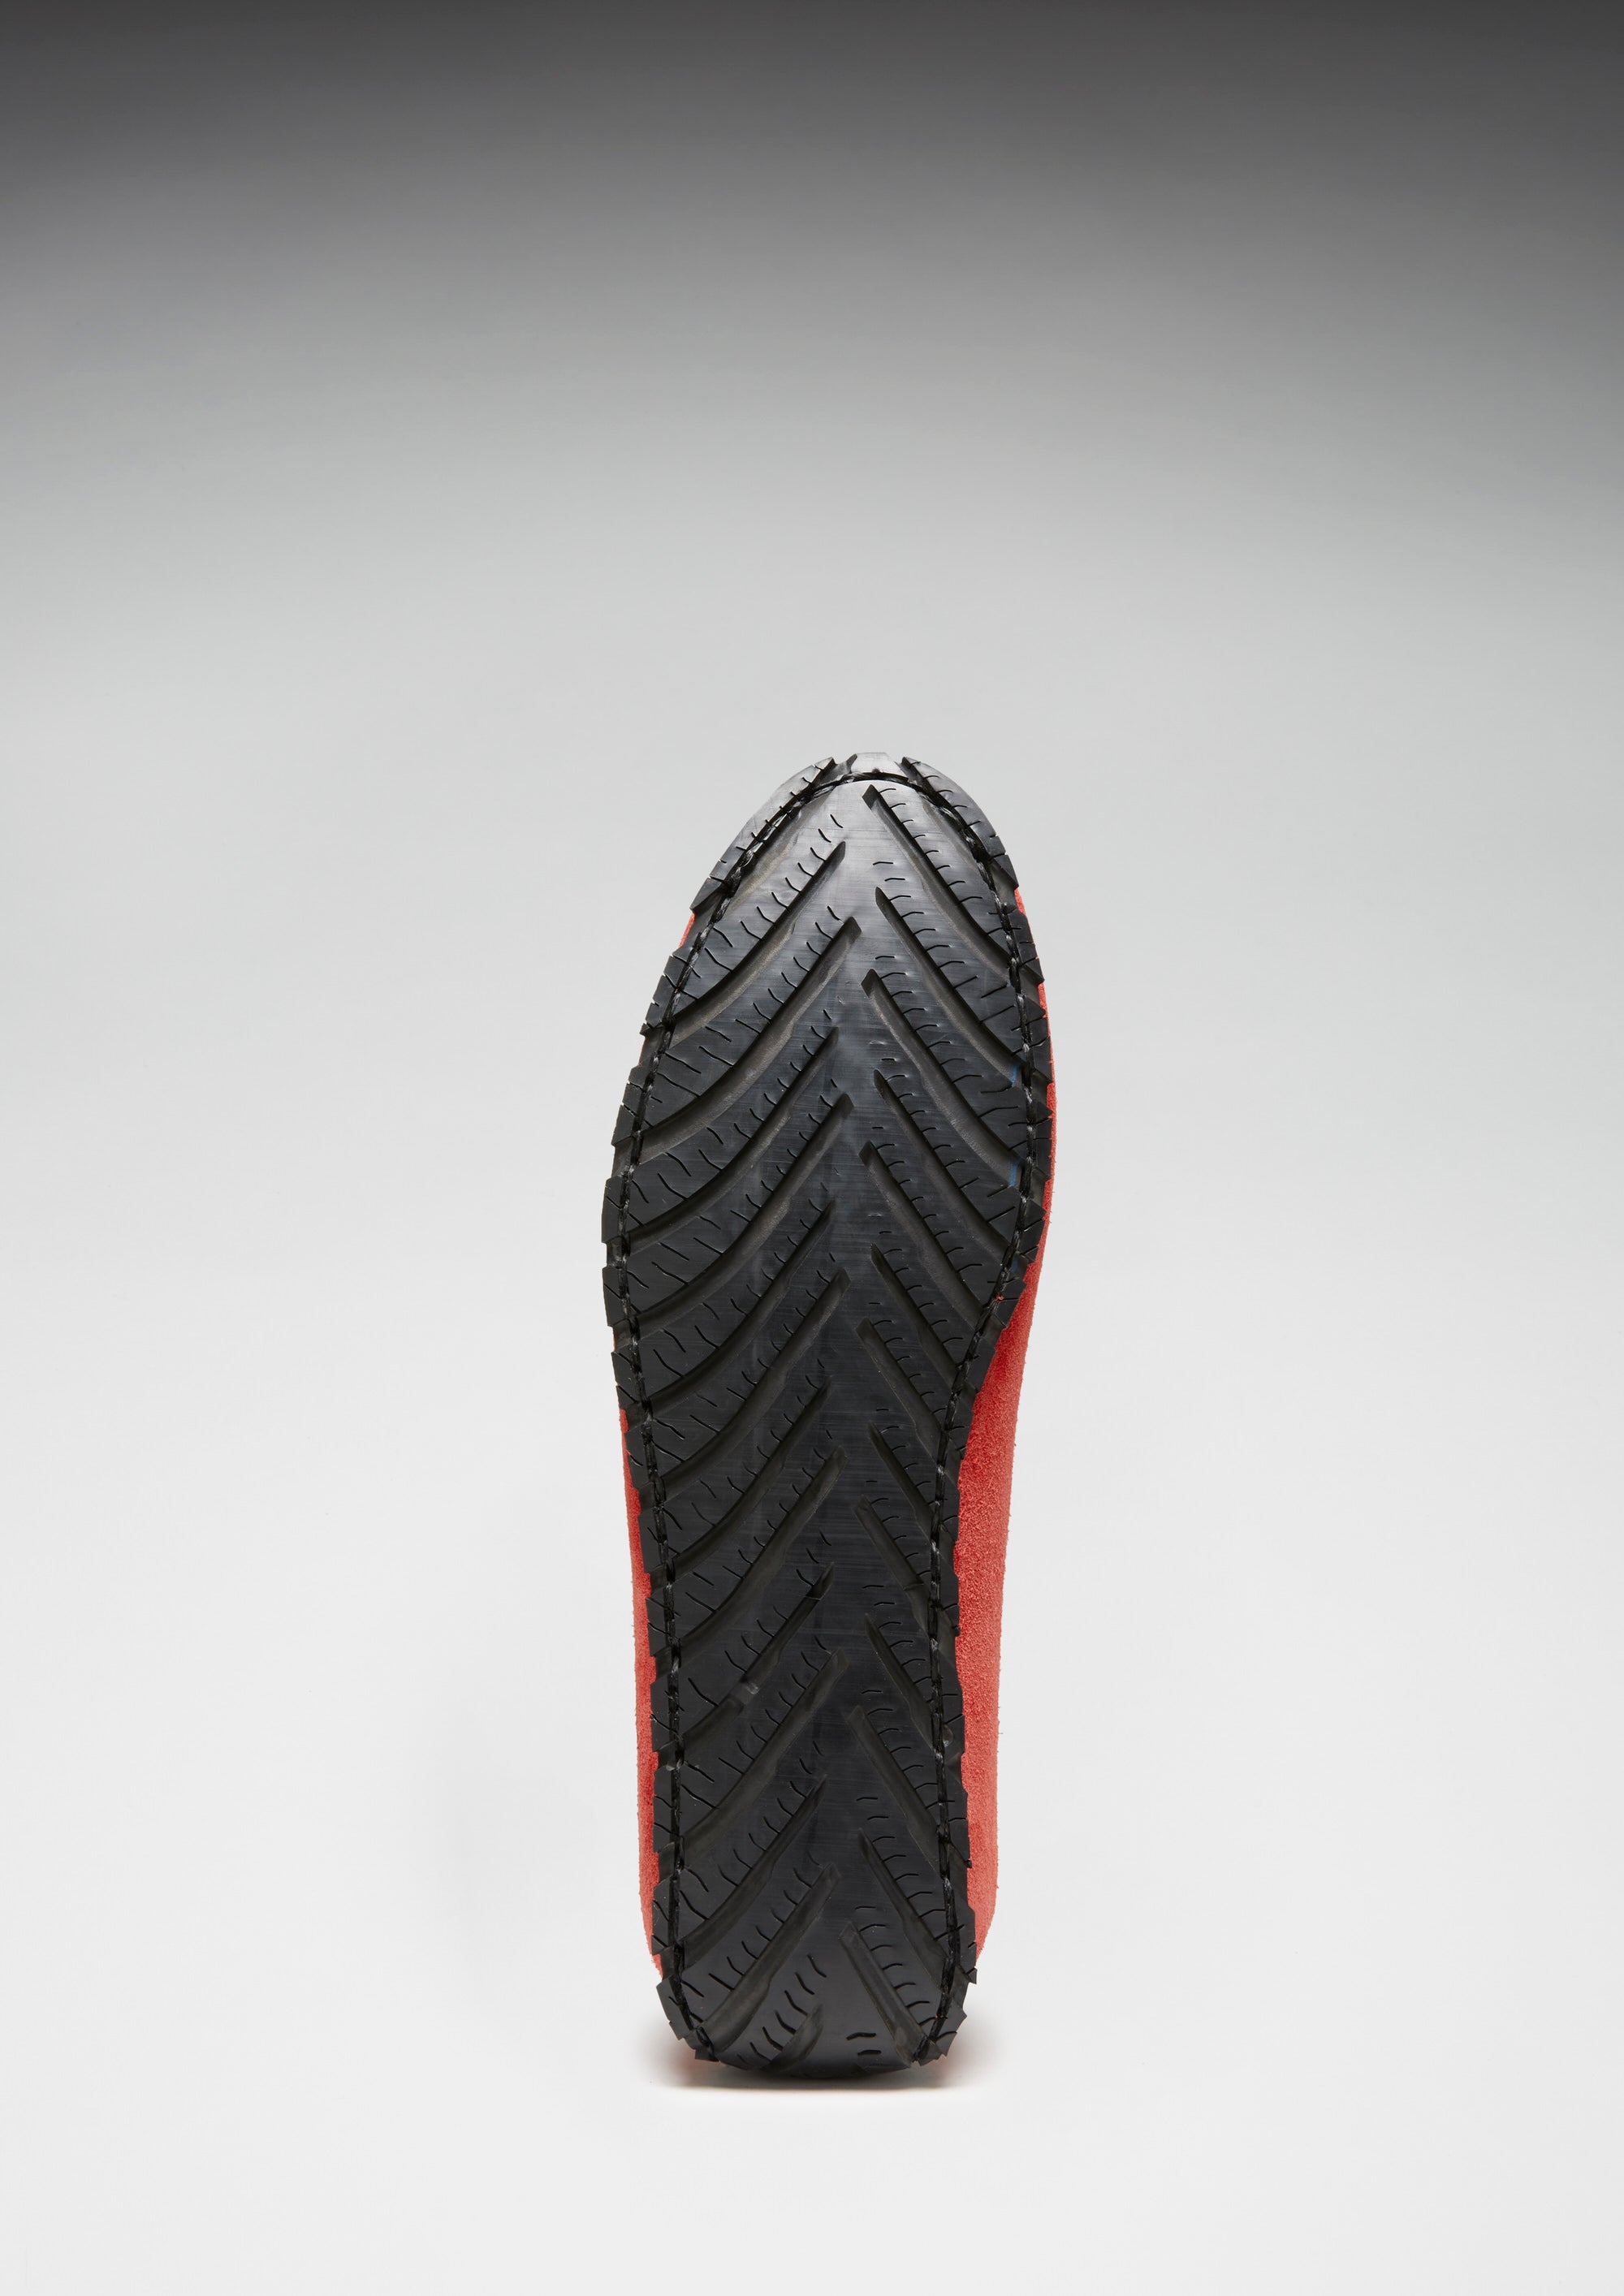 Tire Sole Laced Driving Mocassins, daim rouge